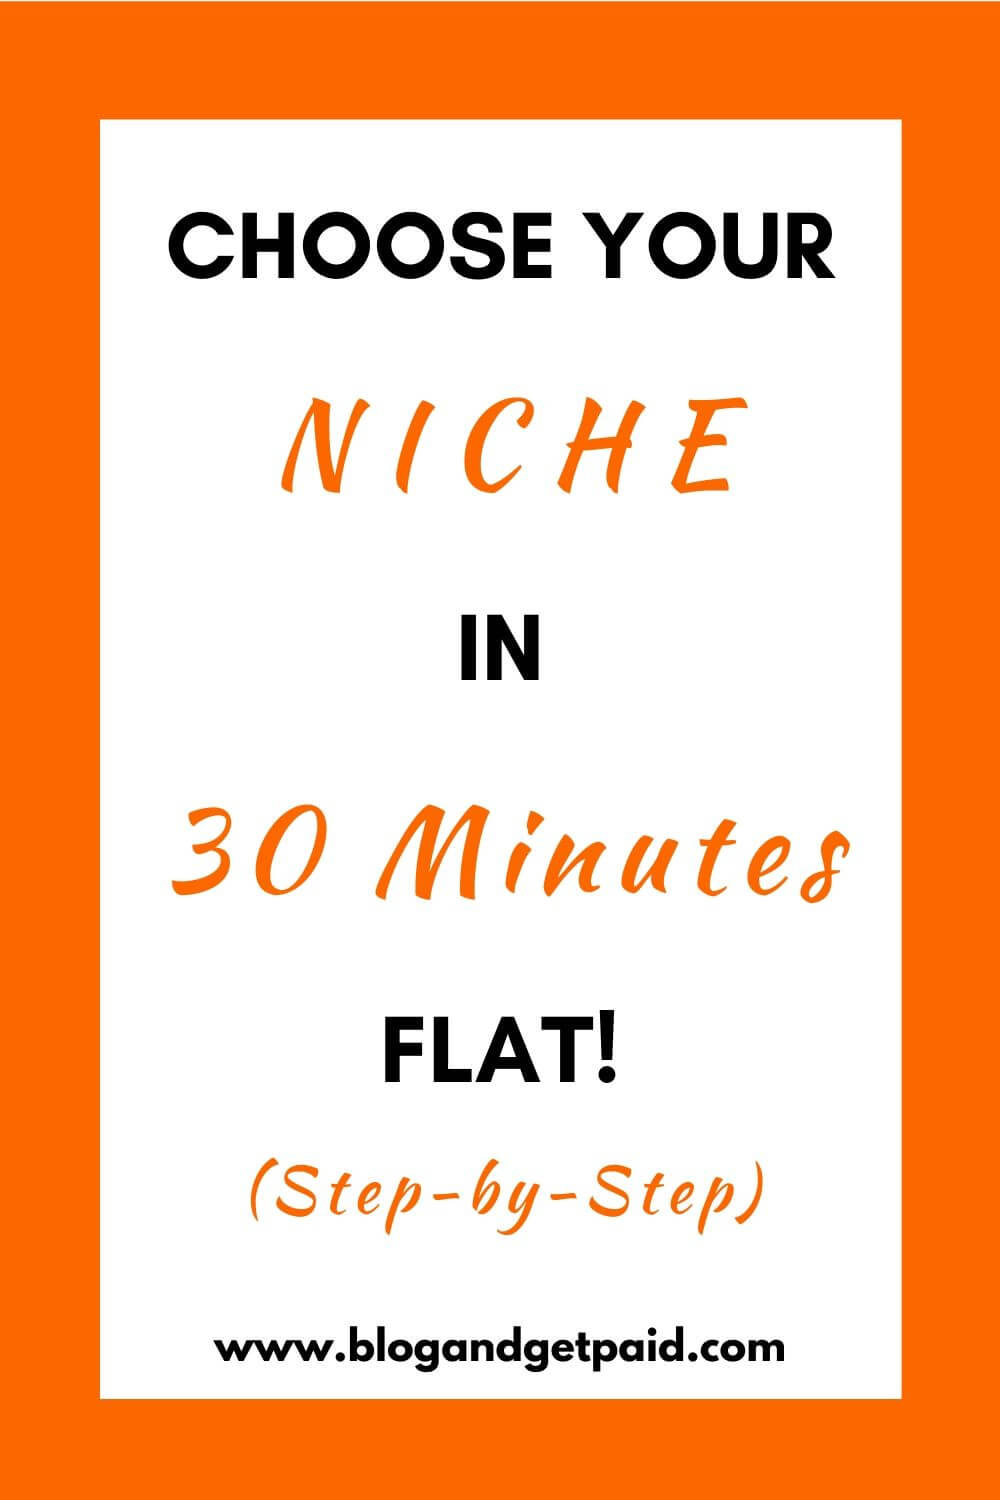 From Zero To Niche In 30 Minutes